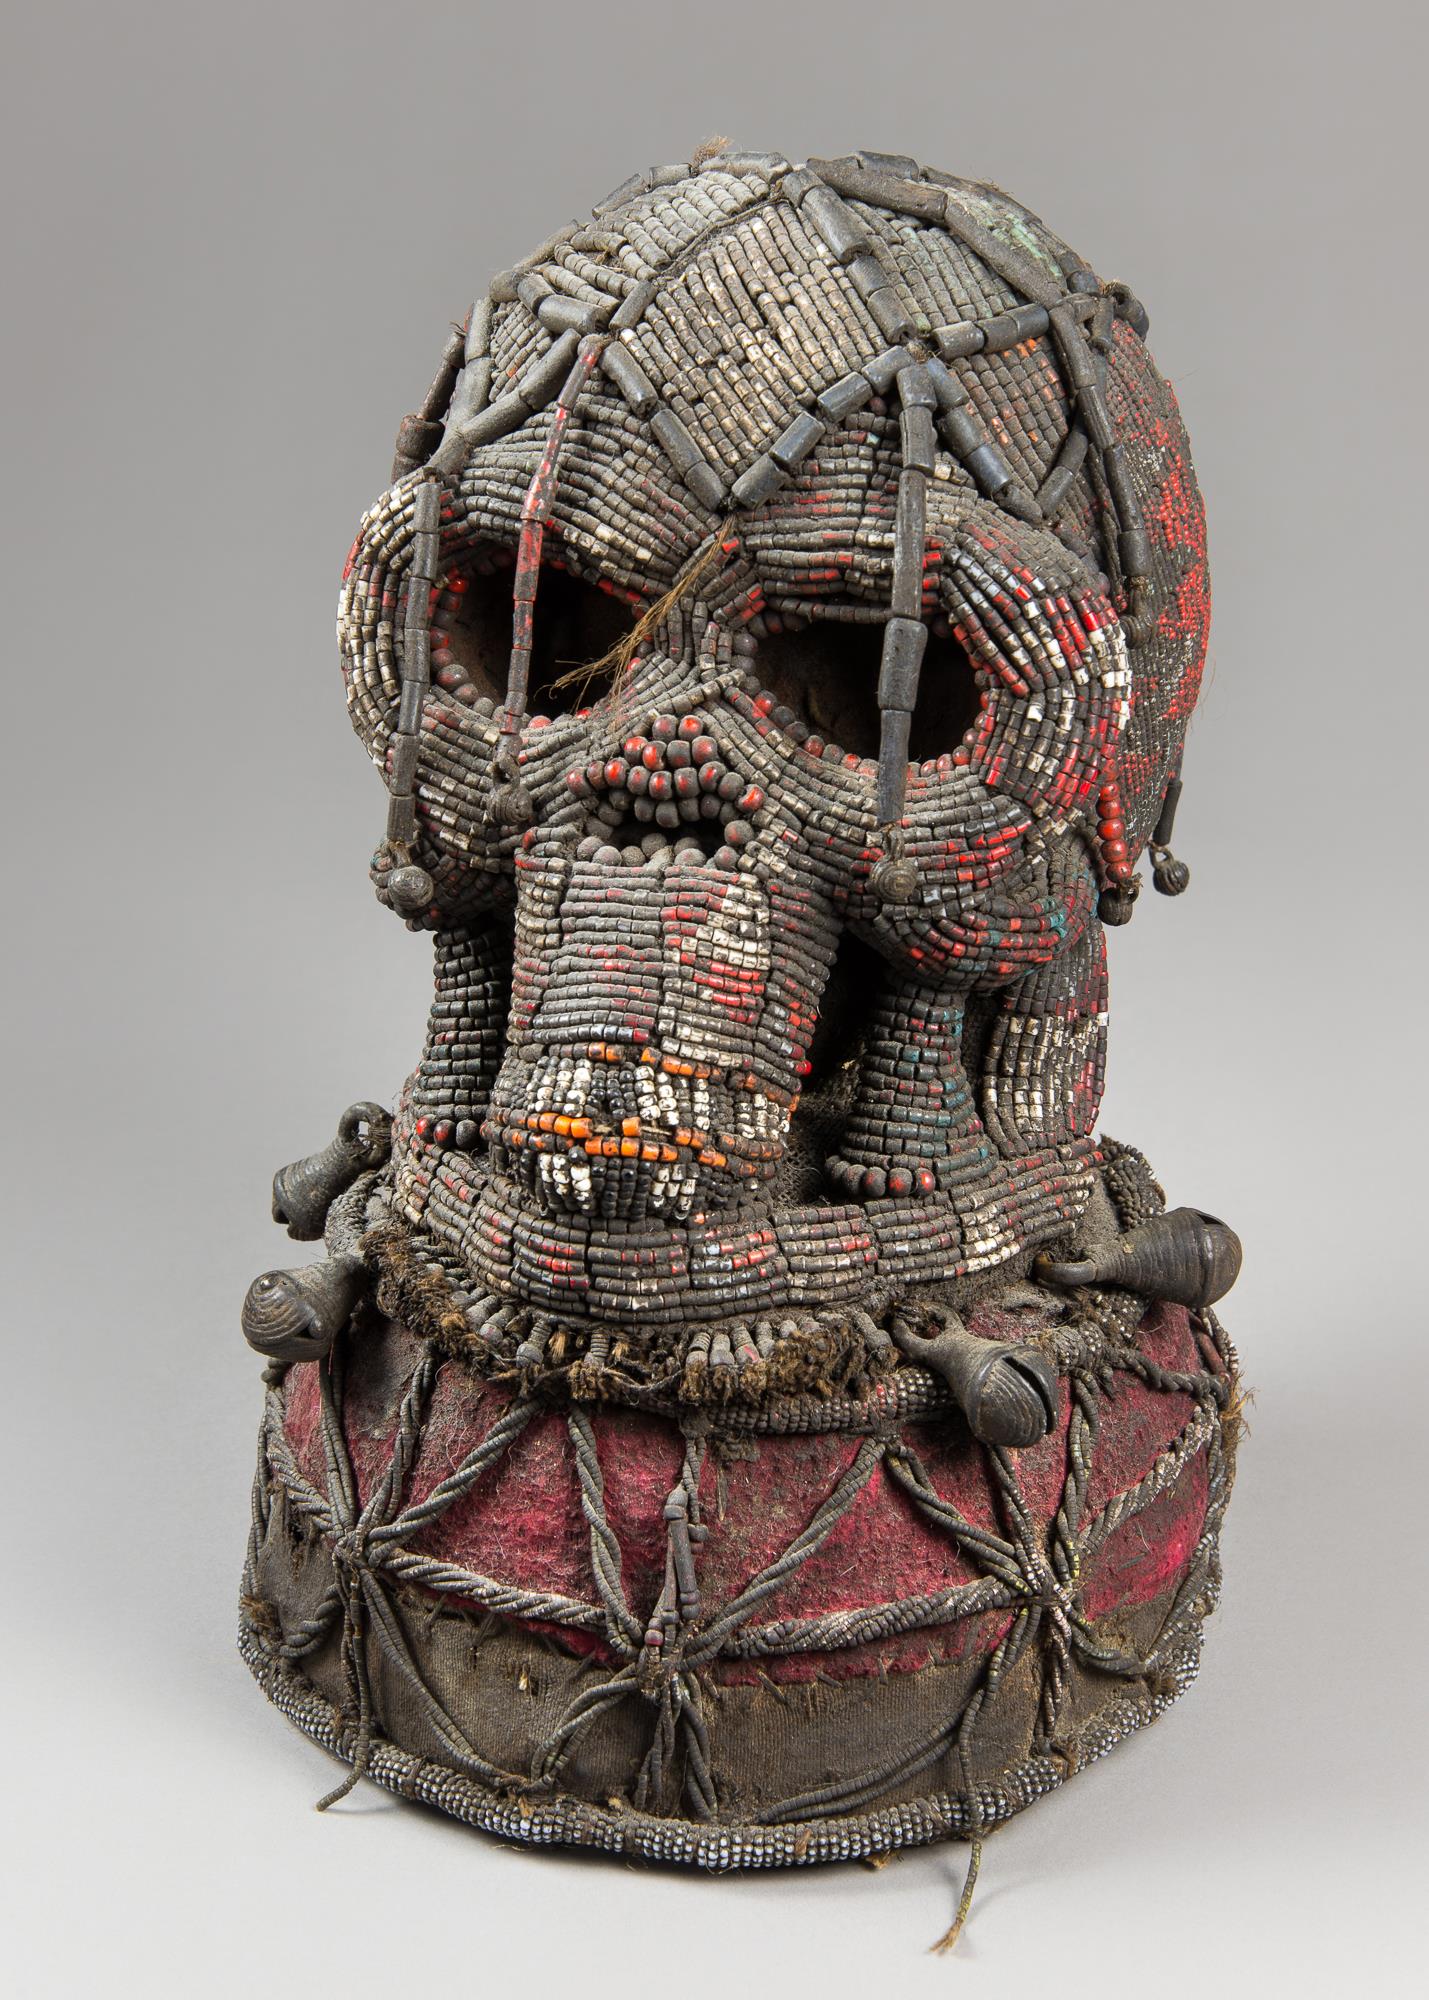 A LARGE TRIBAL BEADED CEREMONIAL CROWN OR ALTAR HEADDRESS, BAMILEKE PEOPLE, CAMEROON, WEST AFRICA.